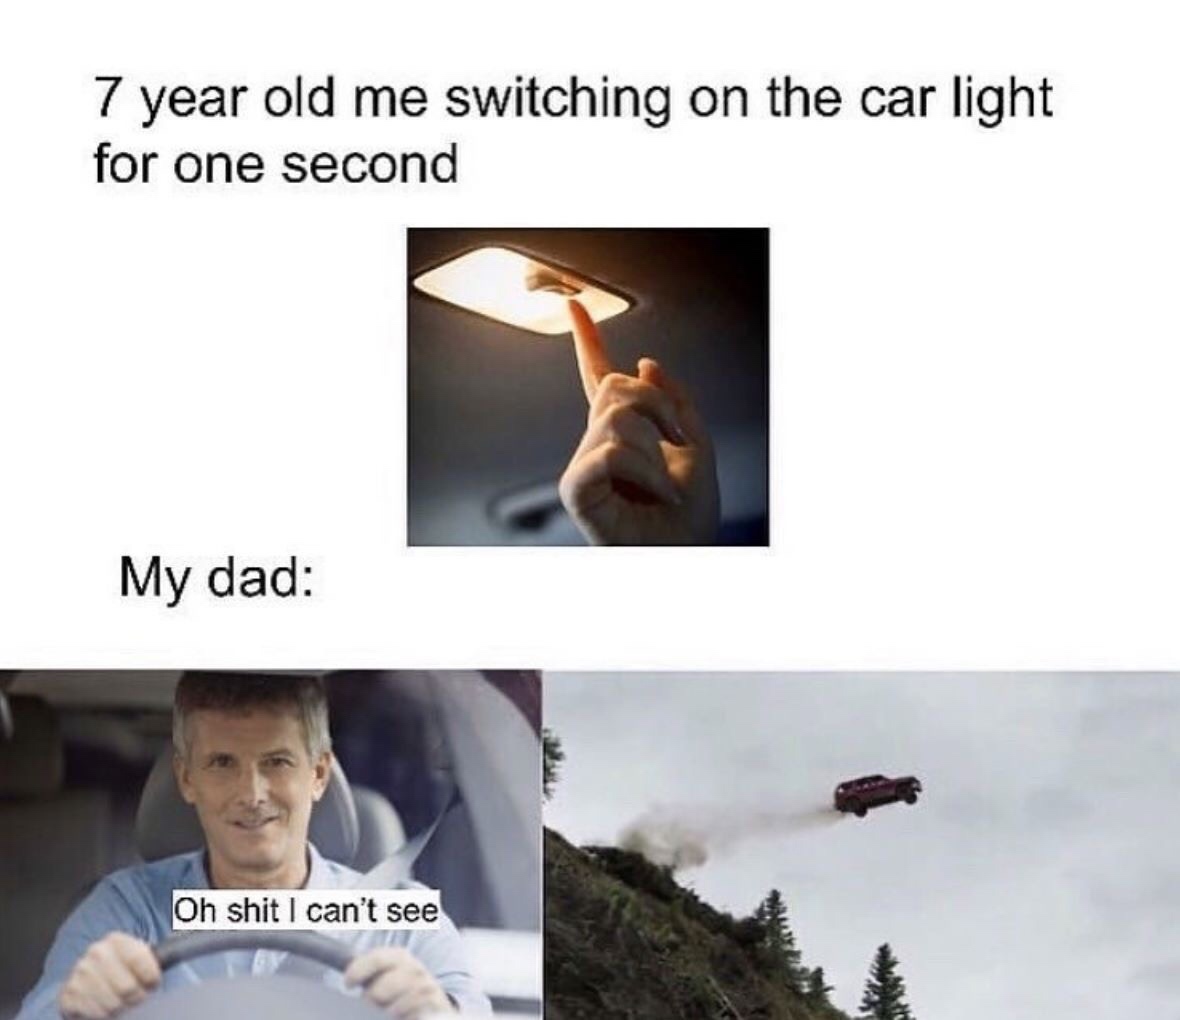 7 year old me switching on the car light - 7 year old me switching on the car light for one second My dad Oh shit I can't see